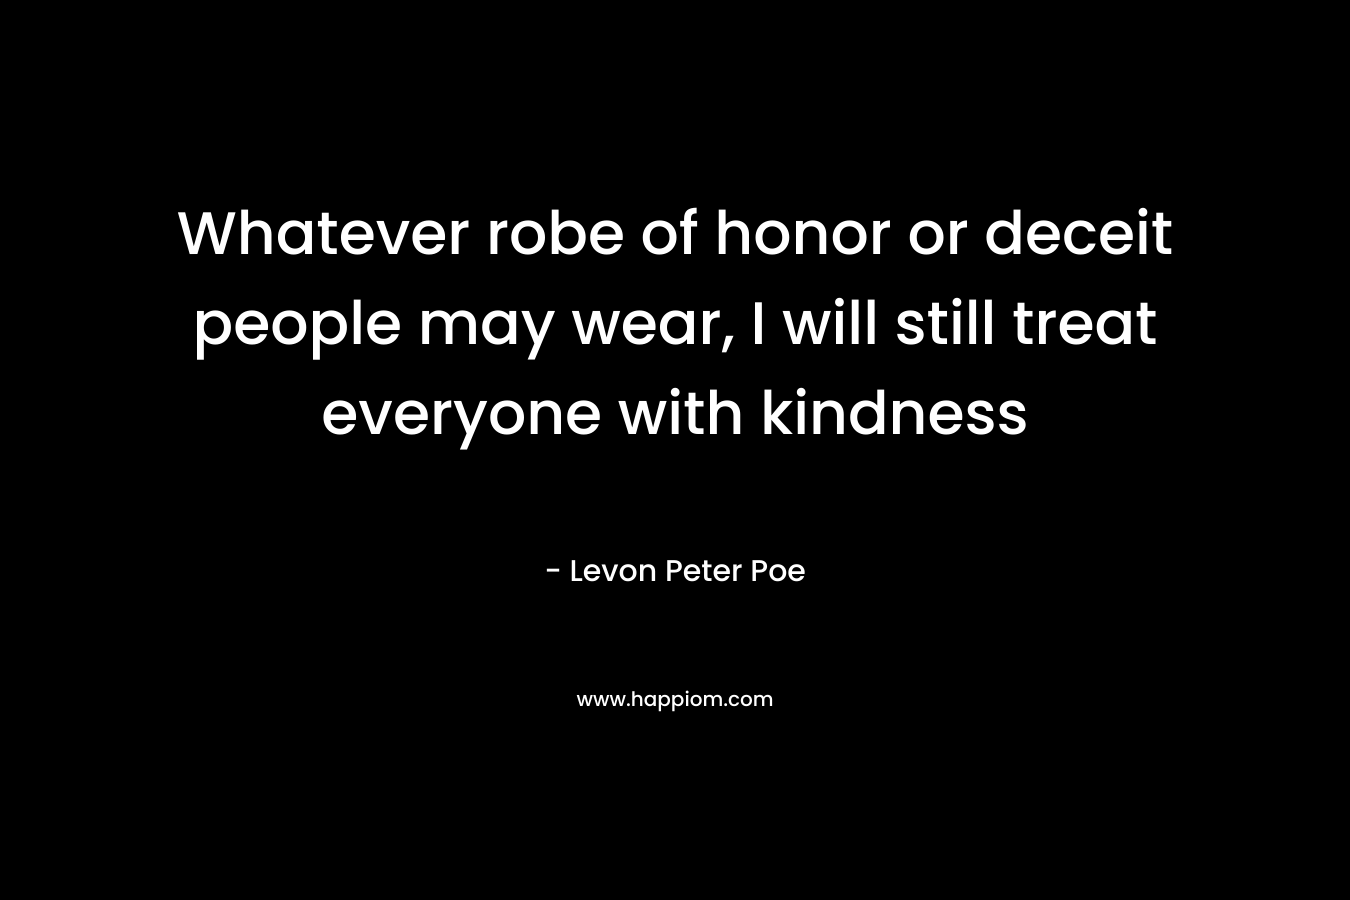 Whatever robe of honor or deceit people may wear, I will still treat everyone with kindness